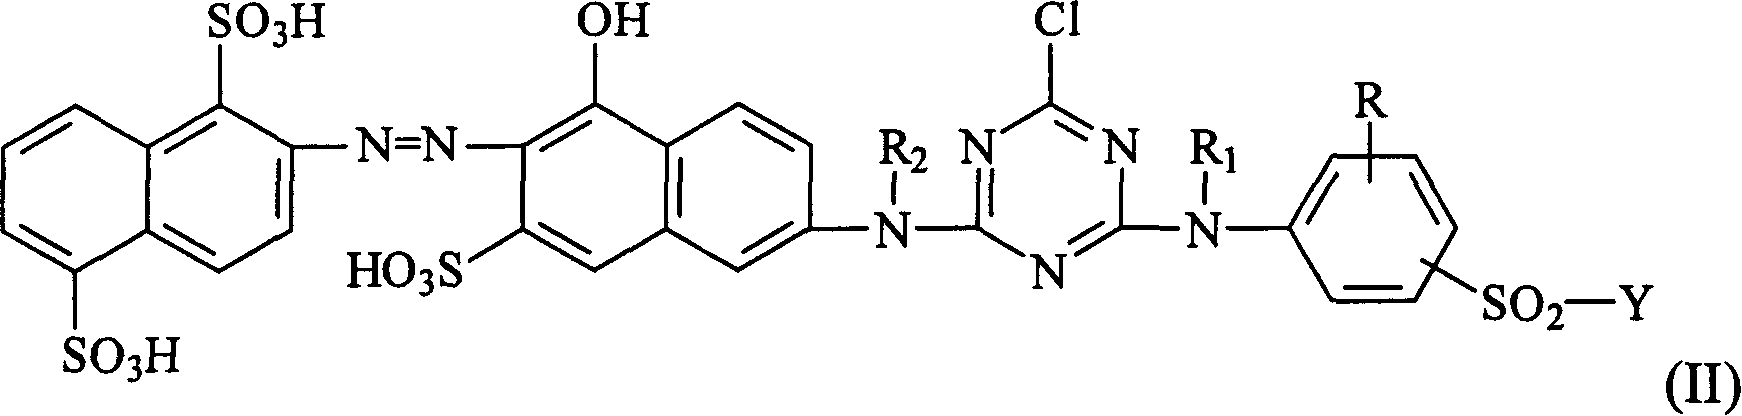 Reaction dyestuff composition and its application